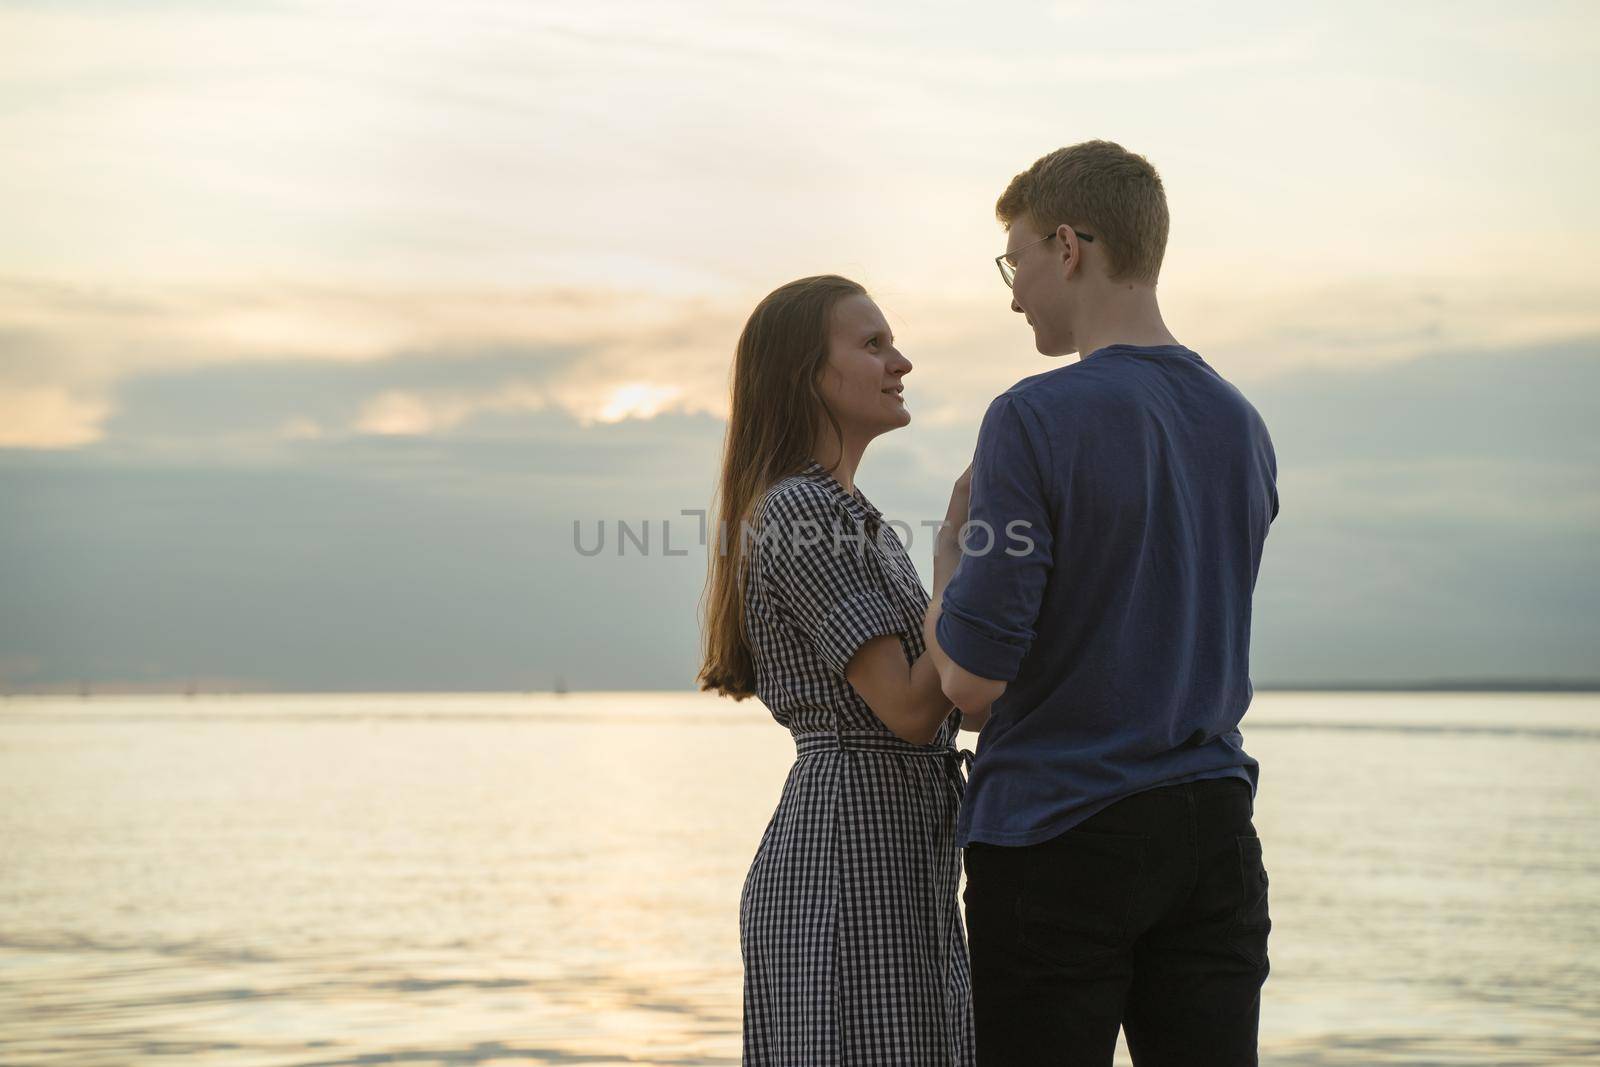 teen couple, ocean clouds and sunset on background, girl looking at boy and smiling